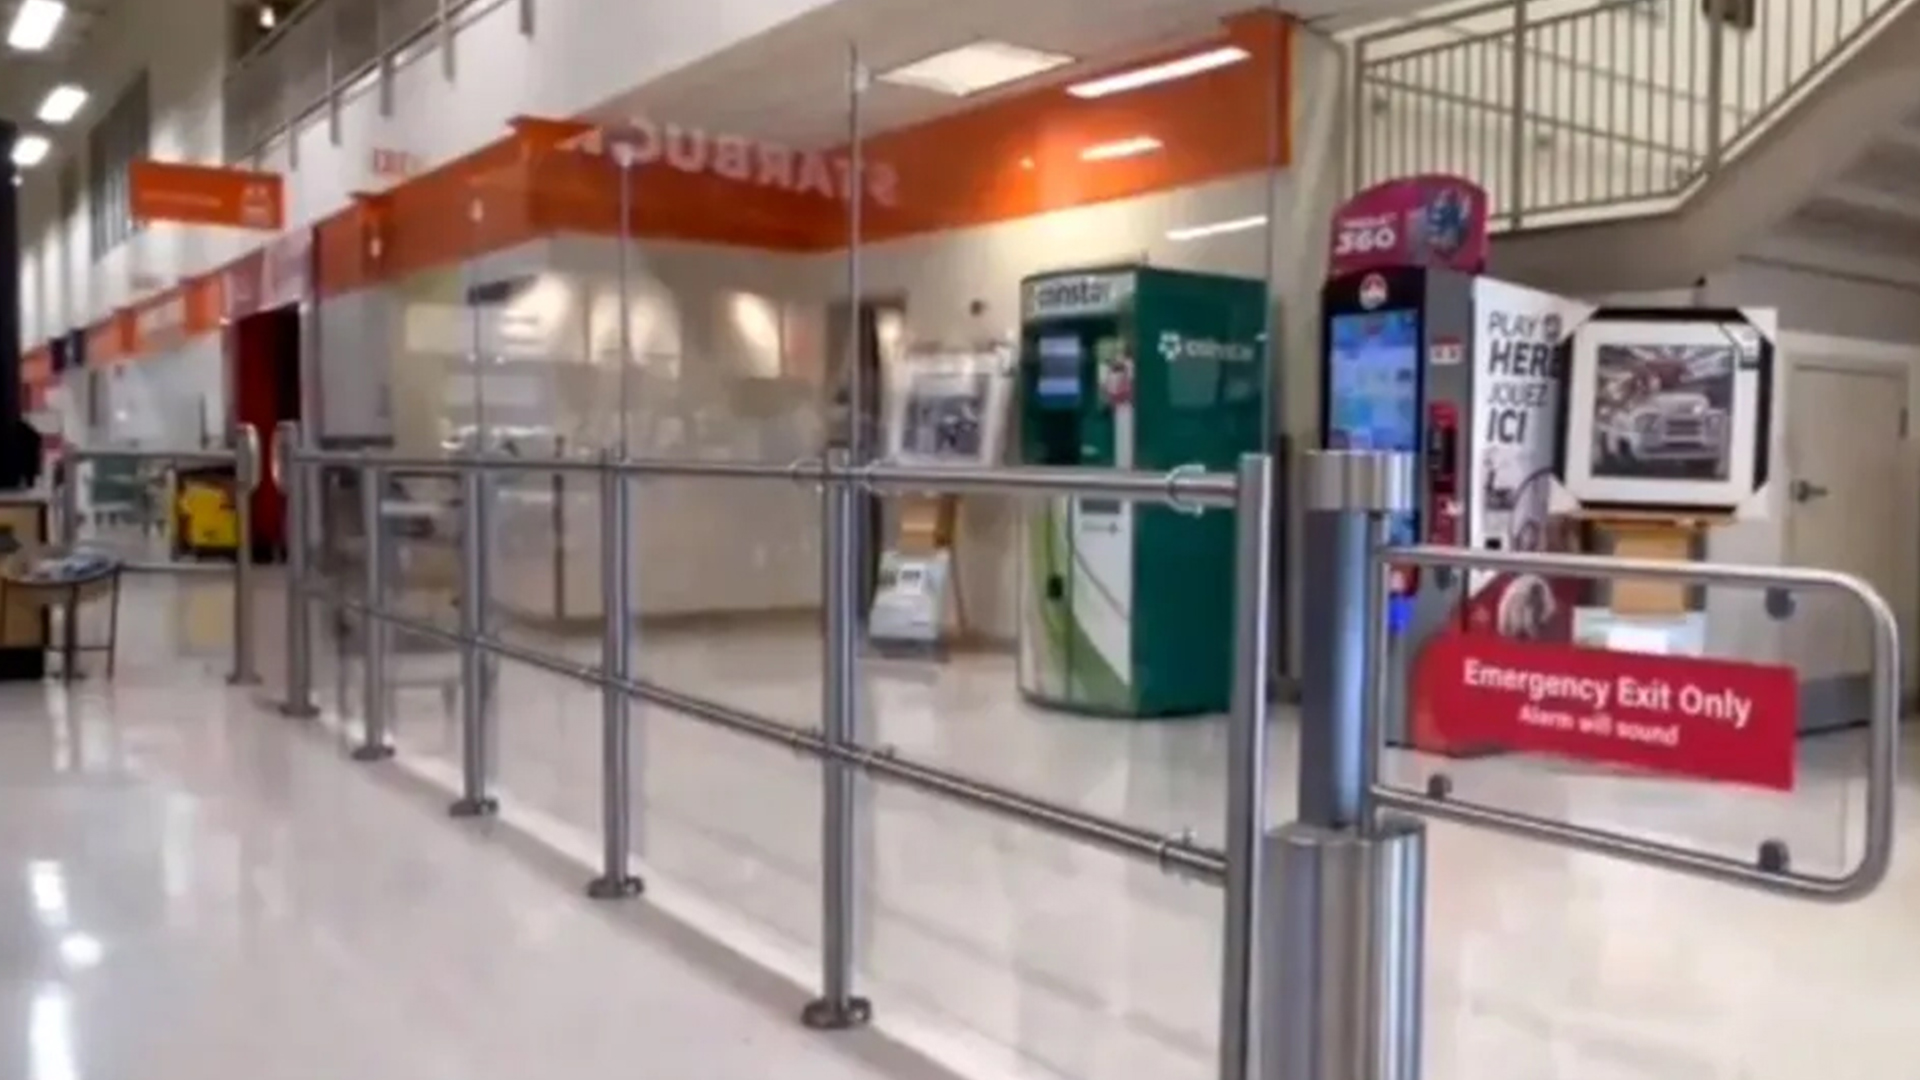 ‘We used to be a civilized society,’ cry shoppers as huge grocery chain locks down self-checkout area to stop theft [Video]